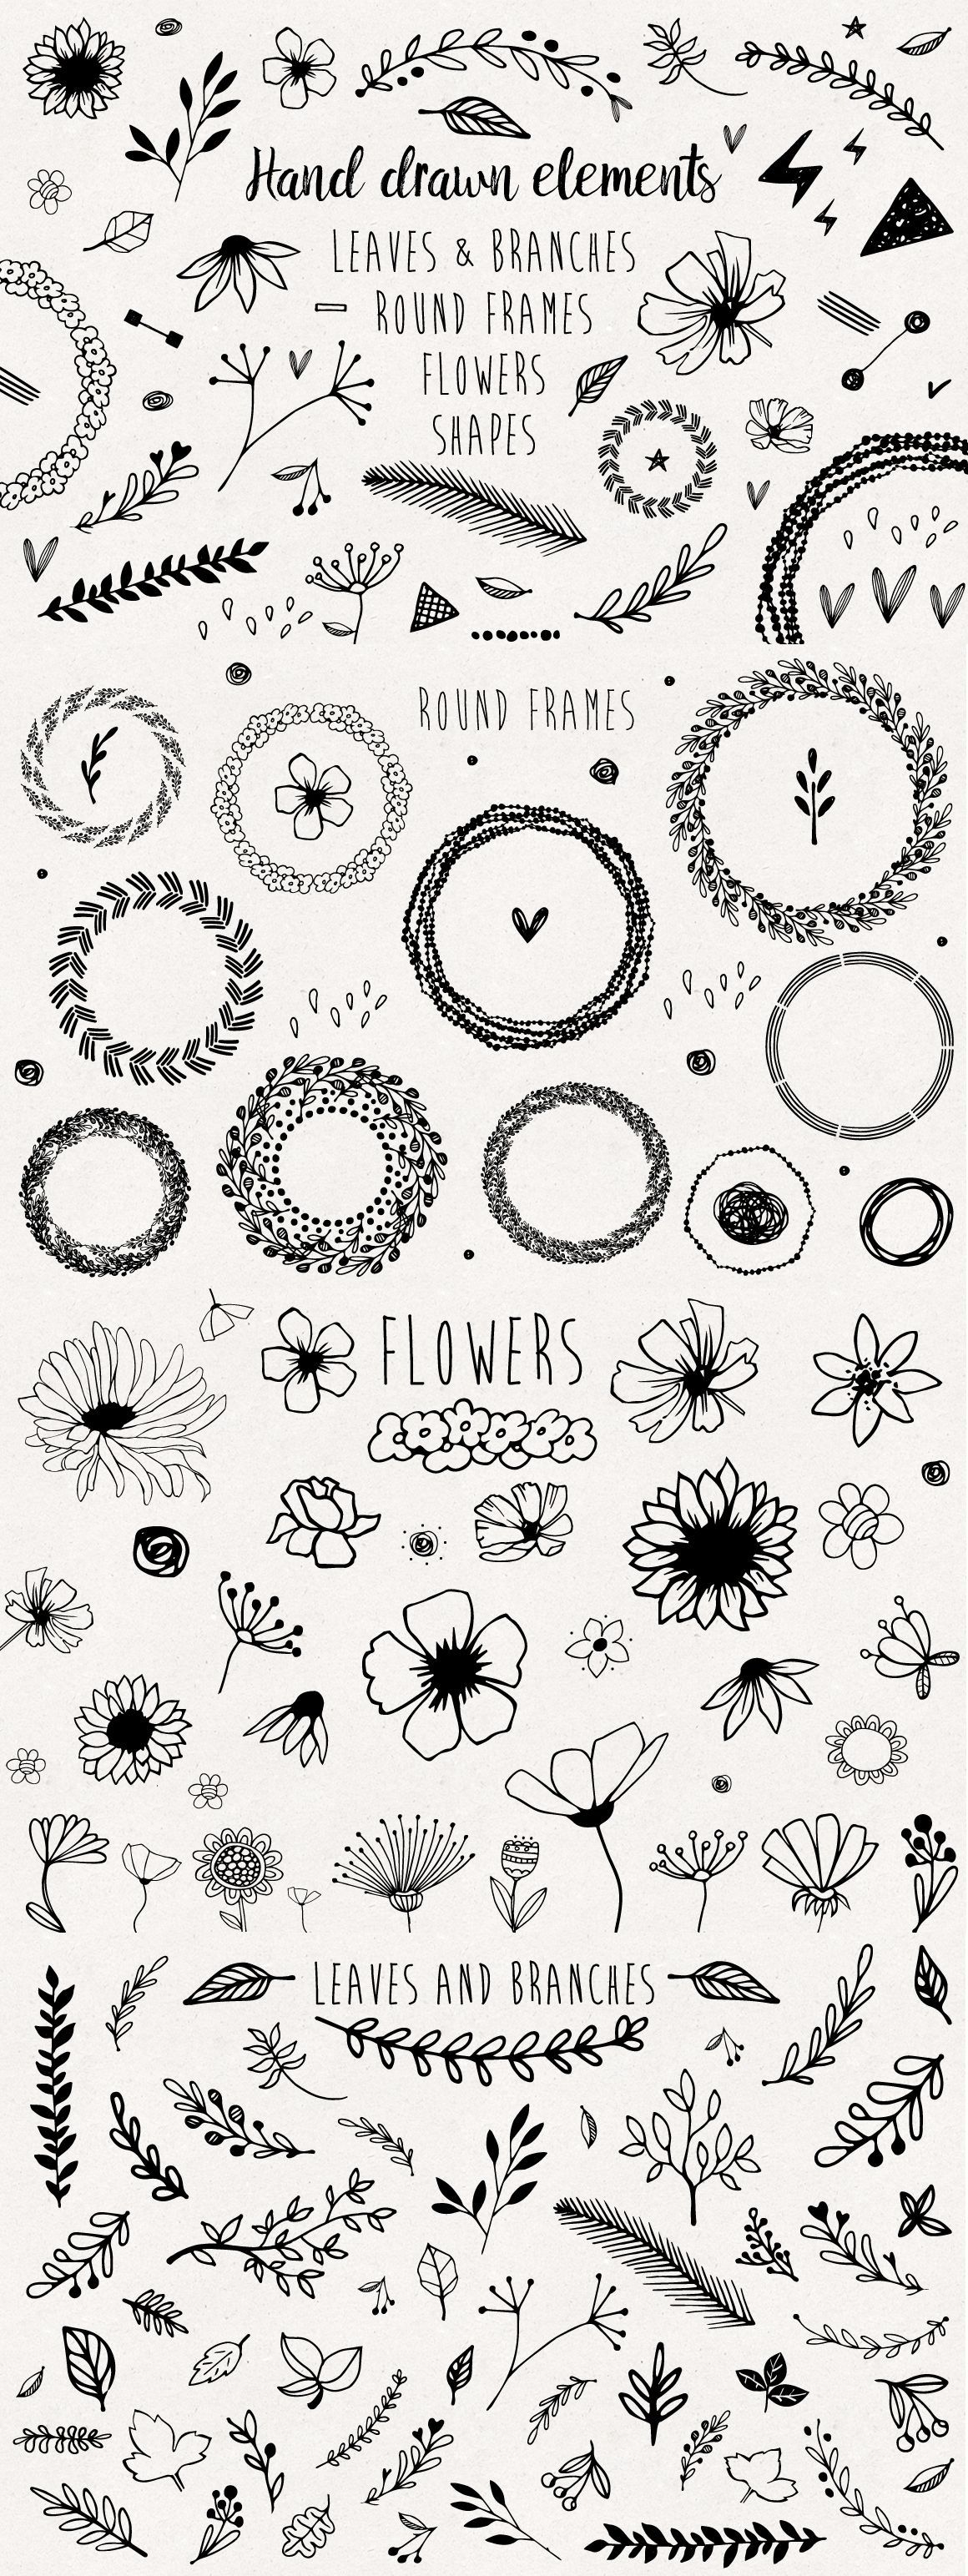 Hand drawn elements collection by mirabella.taide on @Creative Market